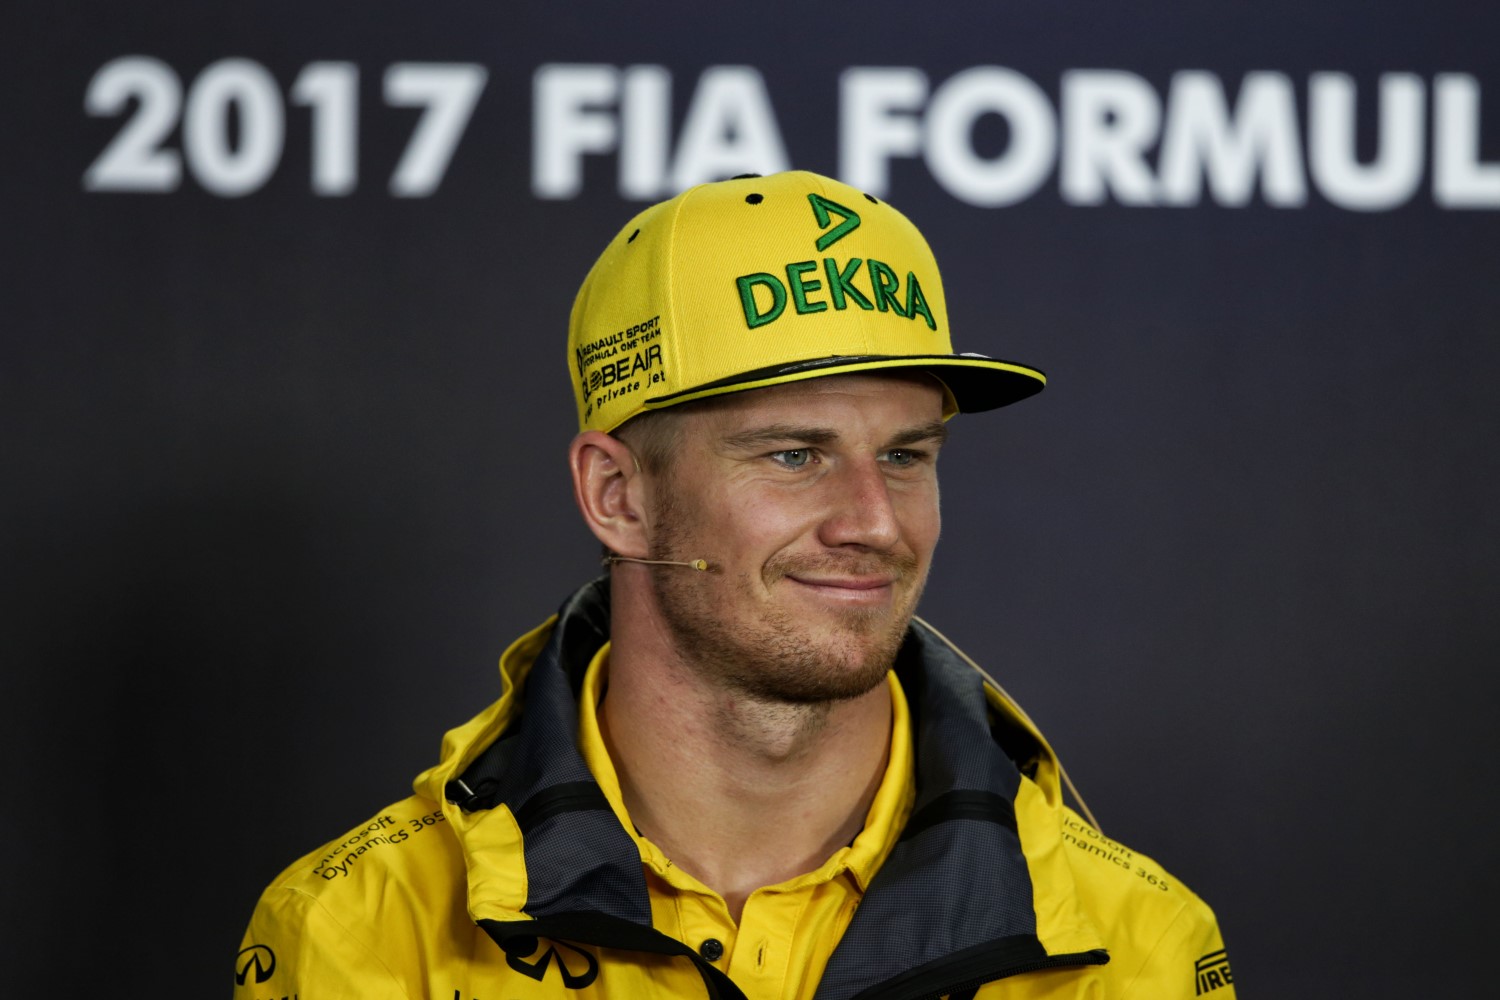 Hulkenberg says the Renault engine had no top-end power to fight at Monza